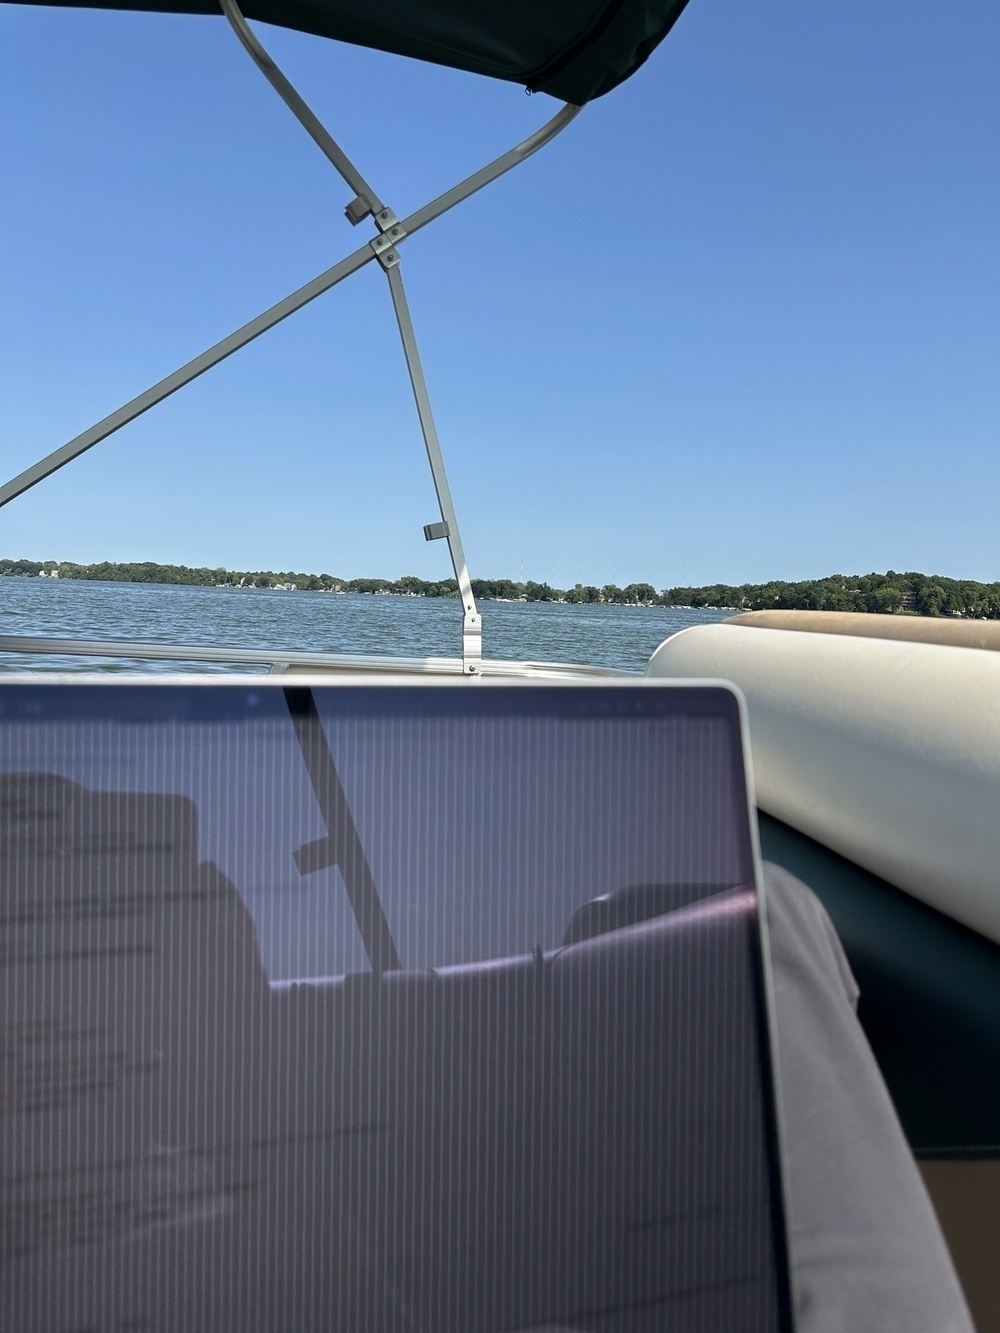 View of a lake from a boat, with a laptop screen reflecting the surroundings.